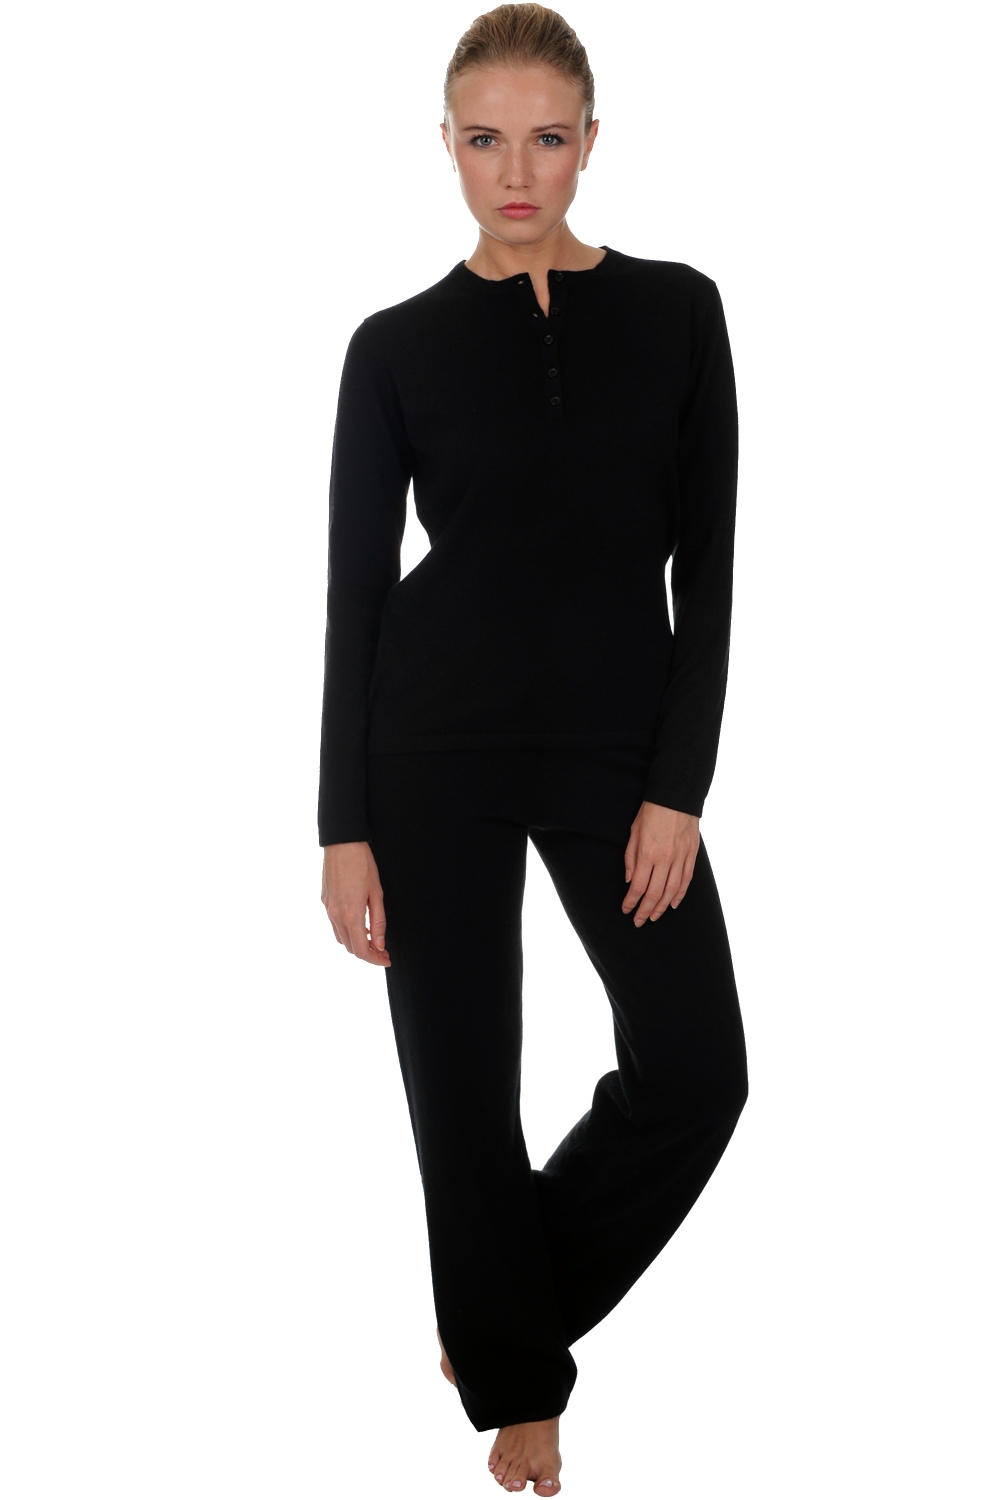 Cashmere accessories cocooning loan black 3xl